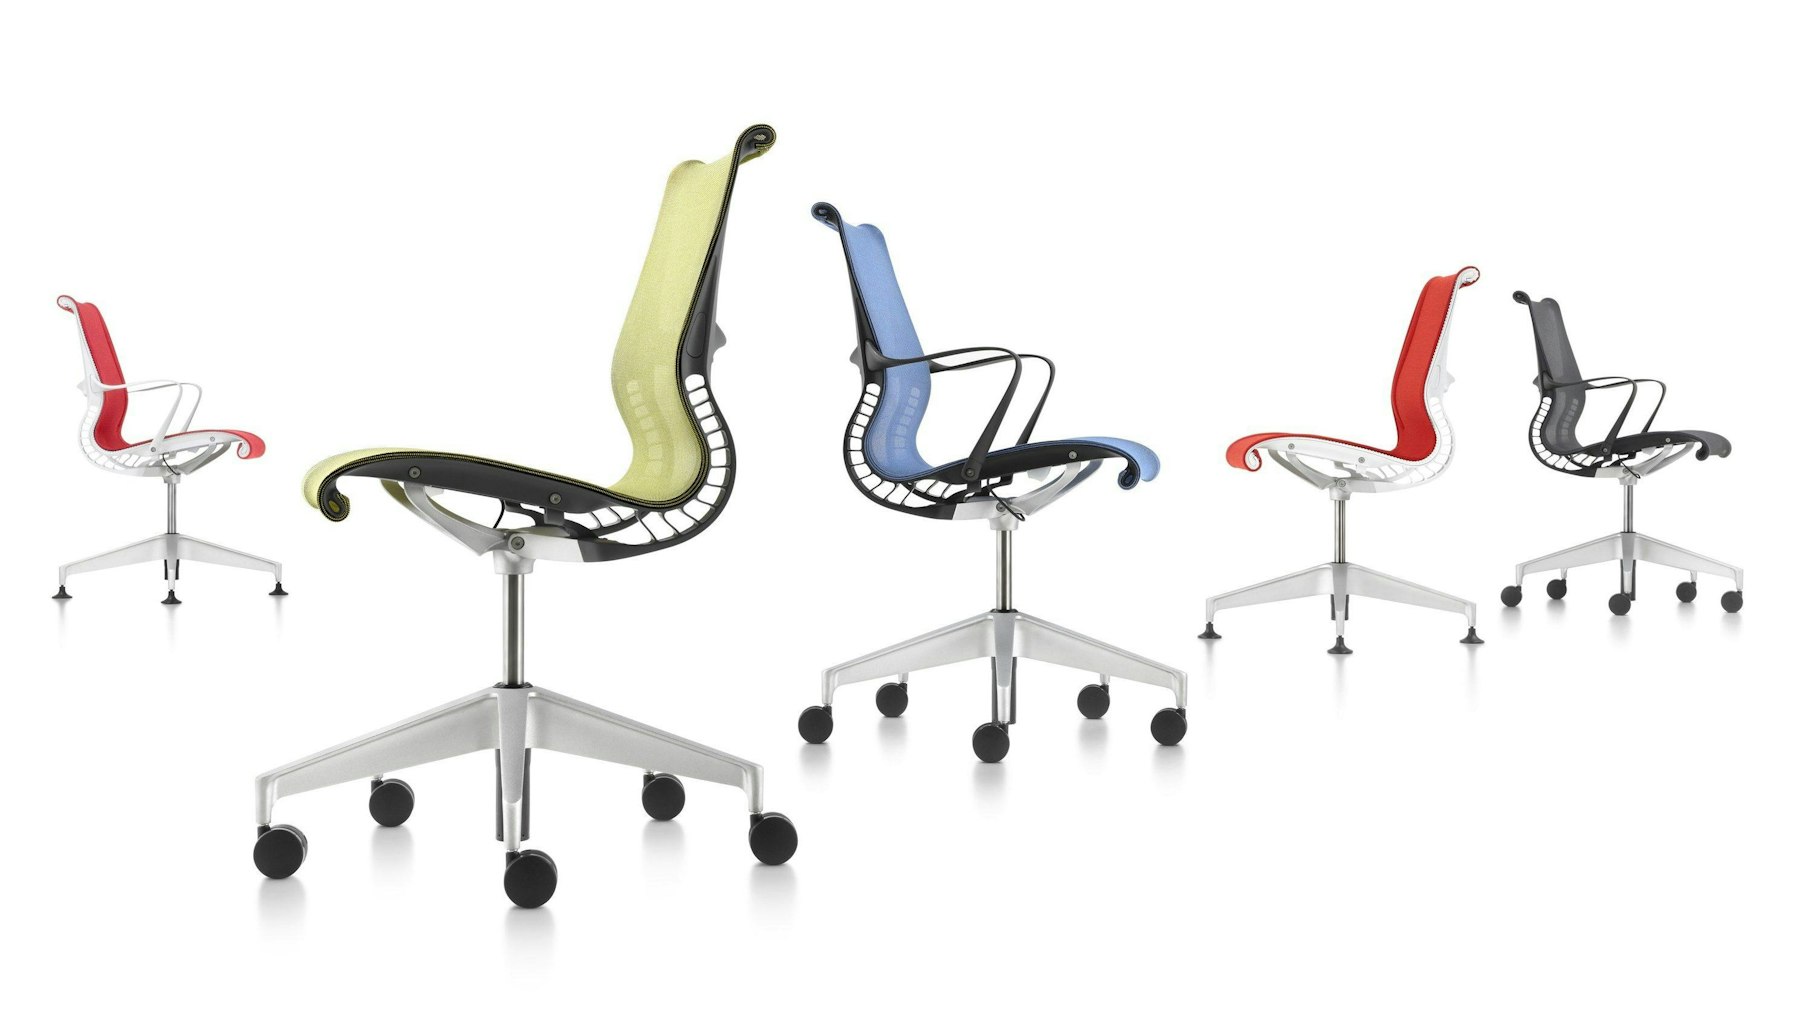 The Miller Knoll brand name Setu chair design showing a variety of chairs in photo.